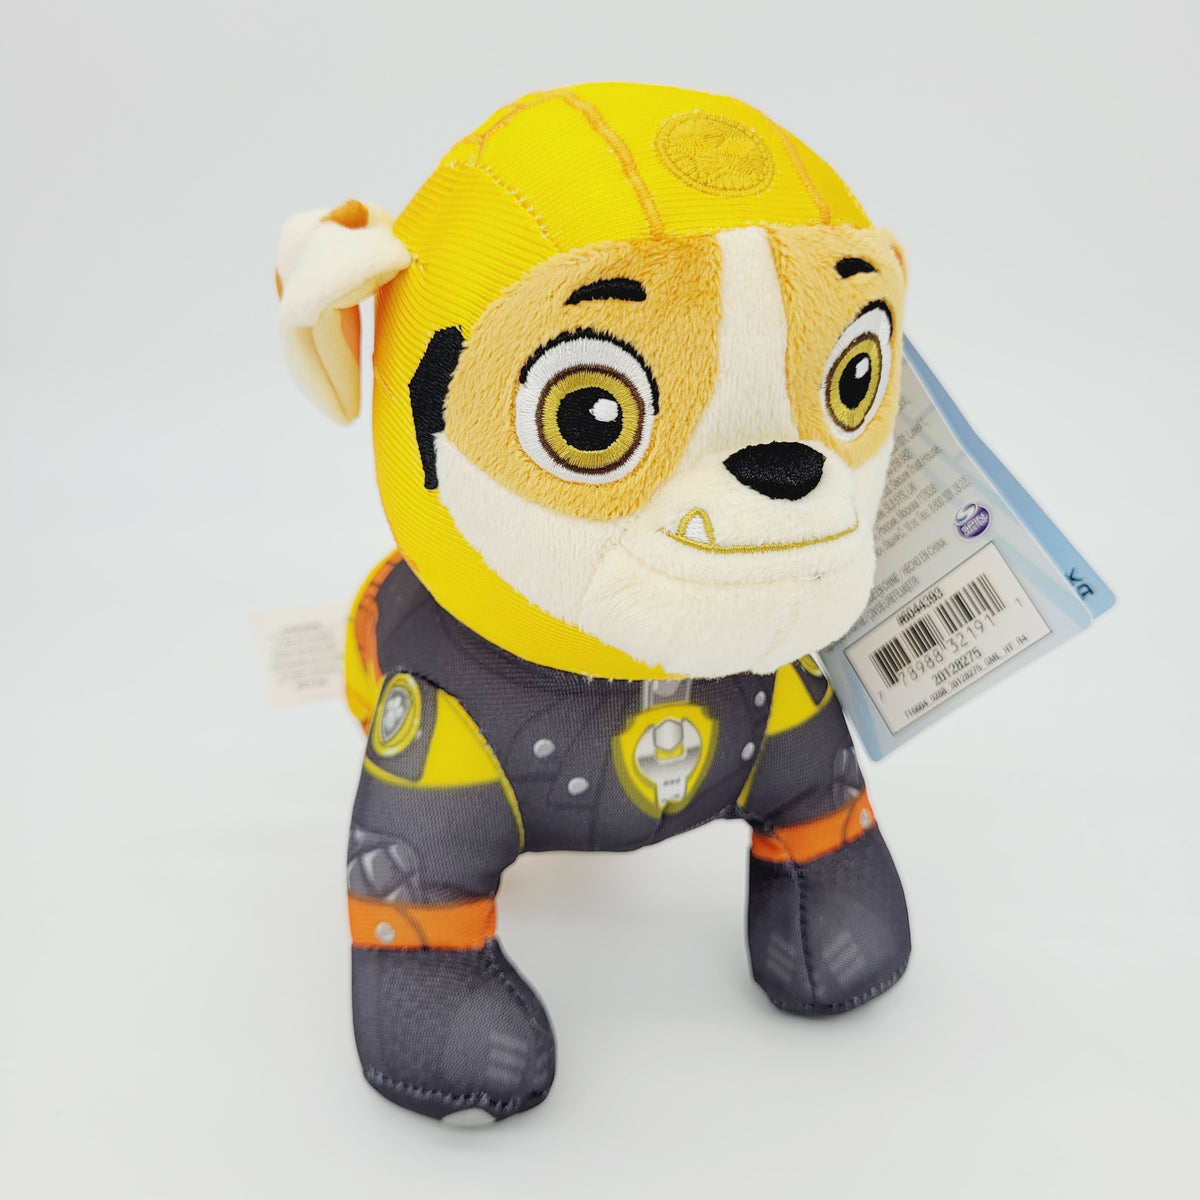 Paw Patrol Moto Pups Nickelodeon Plush Toy 8 inch Collectible by Spin ...